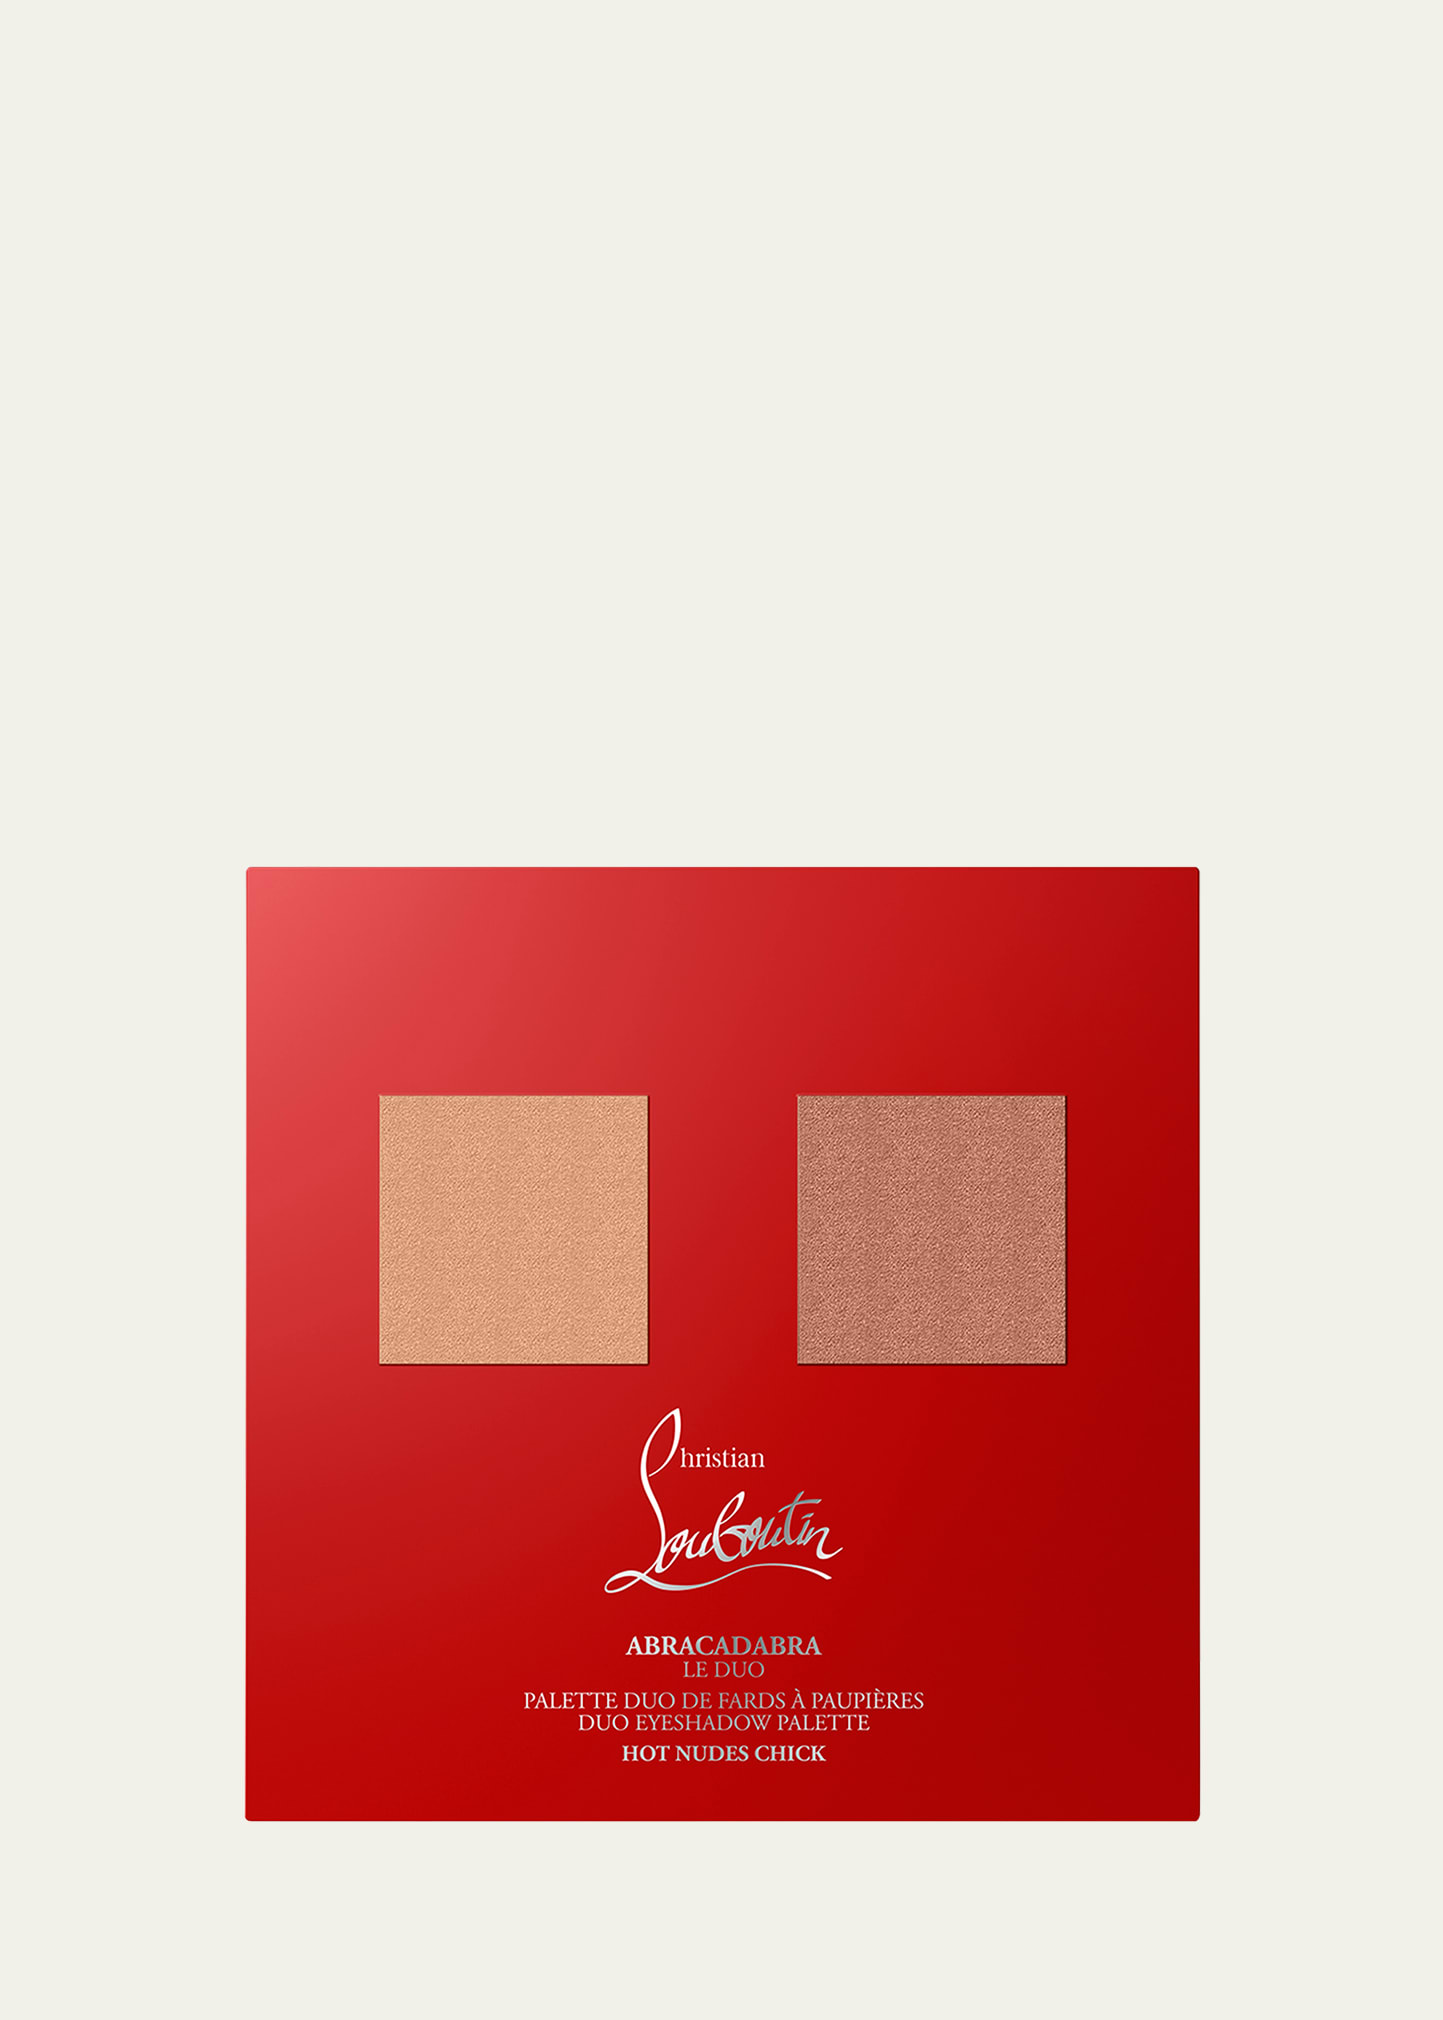 Abracadabra Eyeshadow Palette Duo, Yours with any $50 Christian Louboutin Order